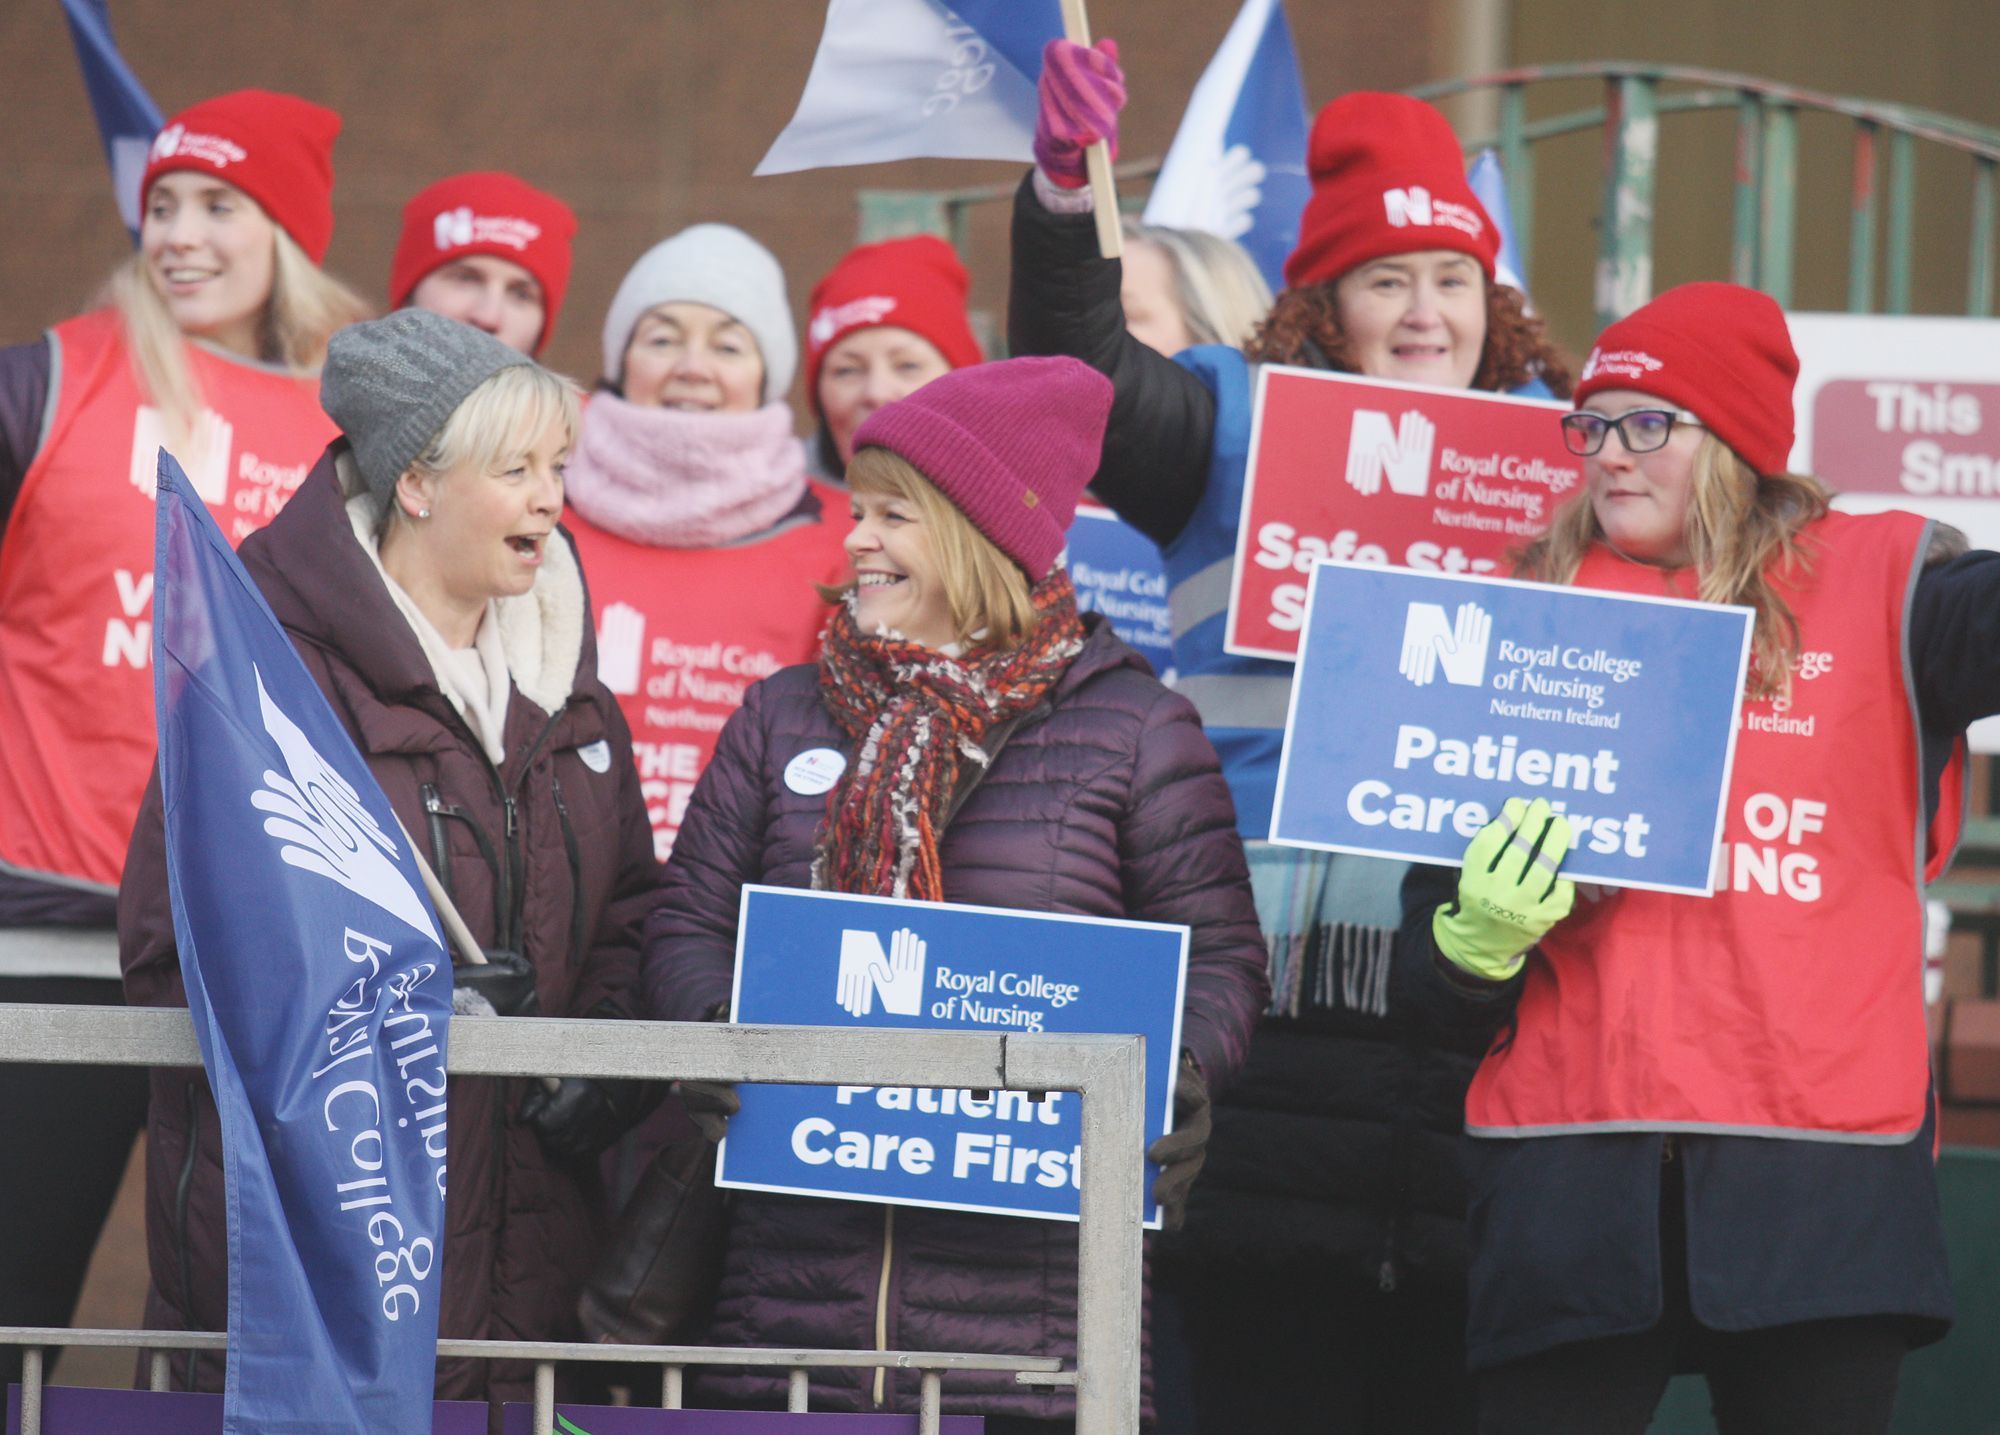 OUT: RCN confirm dates of the first phase of strike action